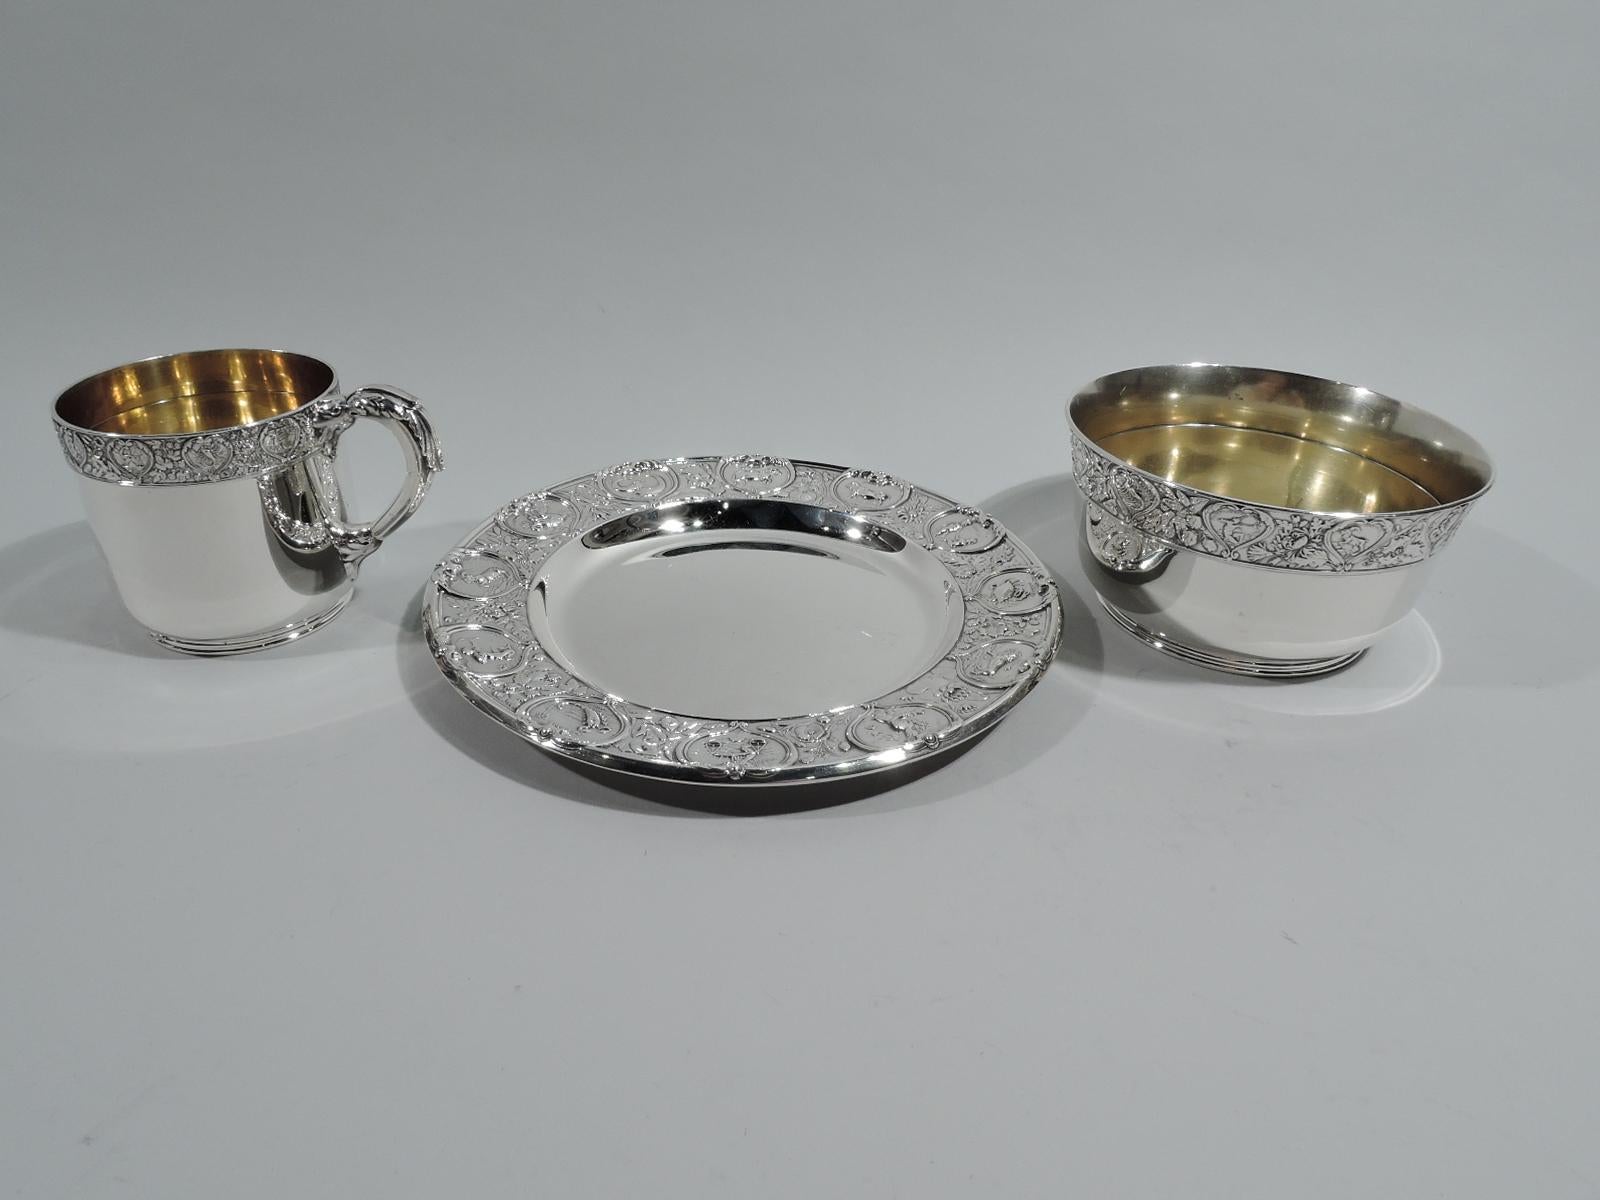 Zodiac sterling silver 3-piece baby set. Made by Gorham in Providence in 1915. This set comprises mug, bowl, and plate. Cup: Straight sides, short inset foot, and leaf-capped and mounted handle; interior gilt washed. Bowl: Gently tapering sides,